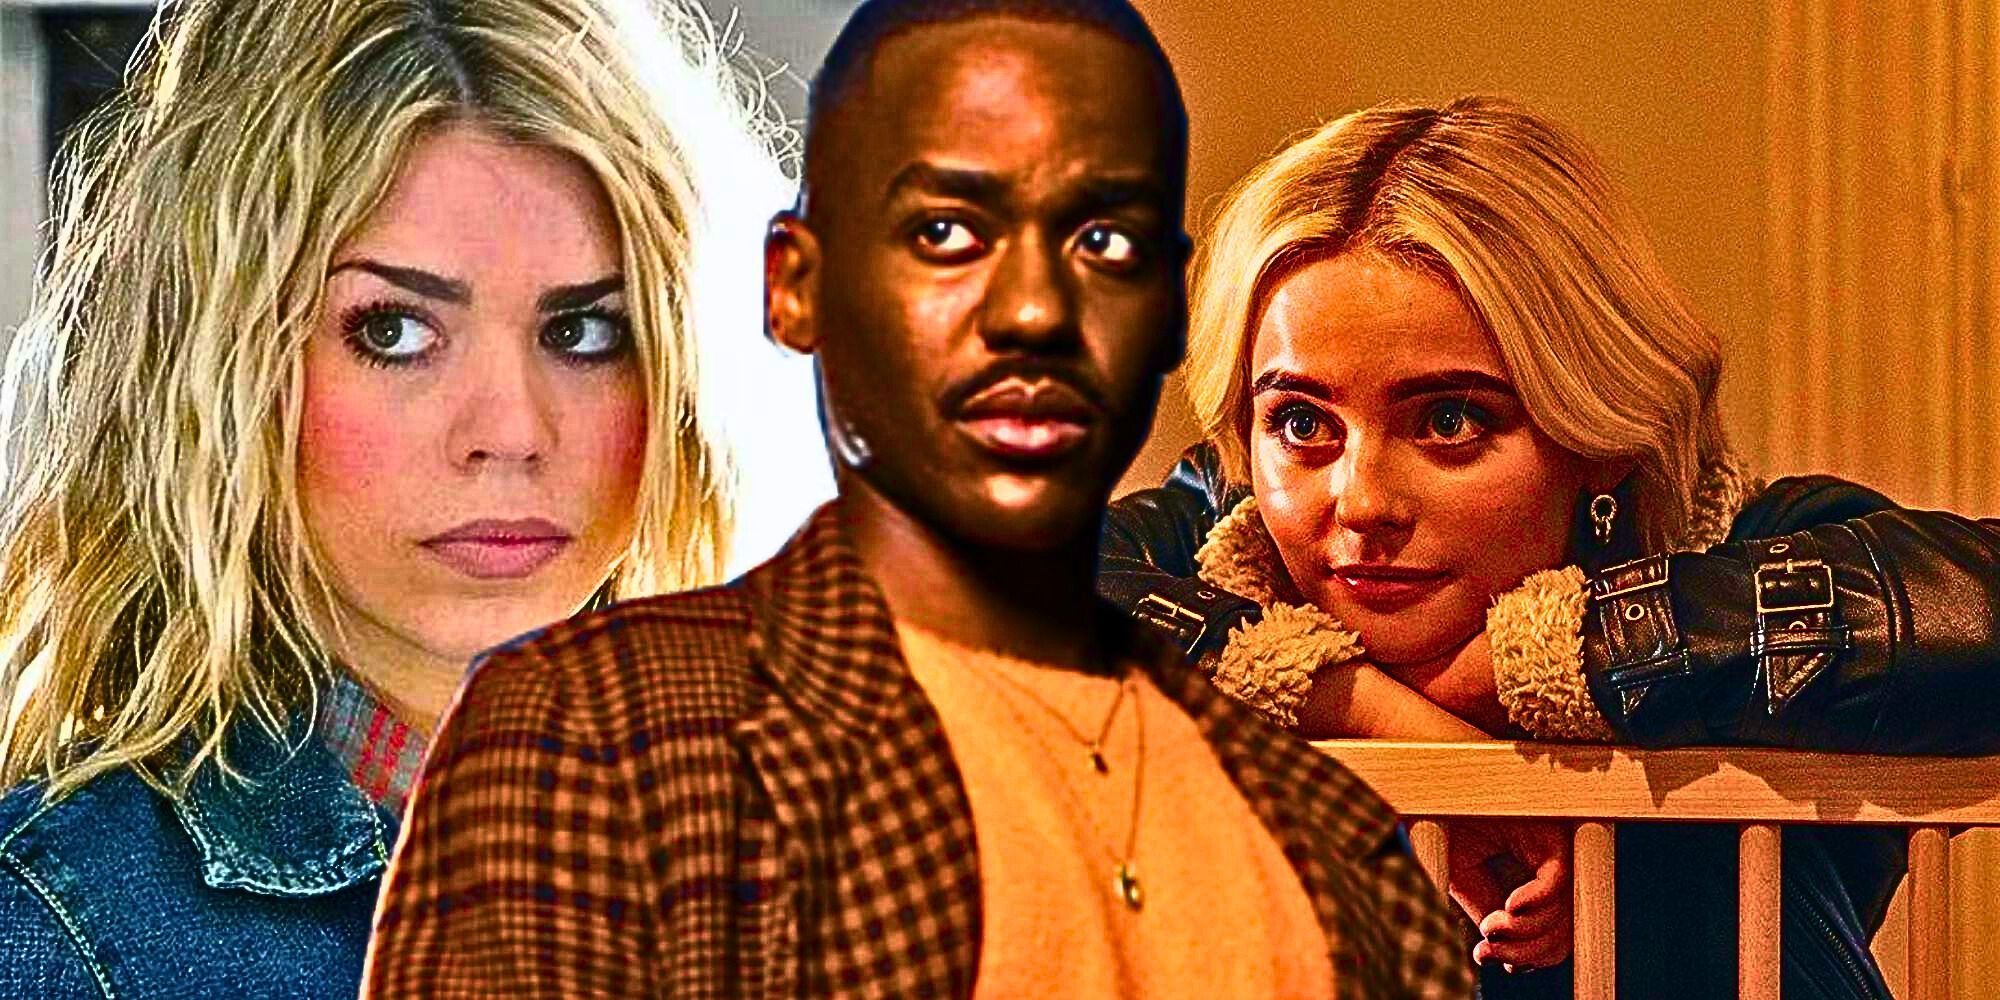 A custom Doctor Who image of Billie Piper as Rose Tyler, Ncuti Gatwa as the Fifteenth Doctor, and Millie Gibson as Ruby Sunday.